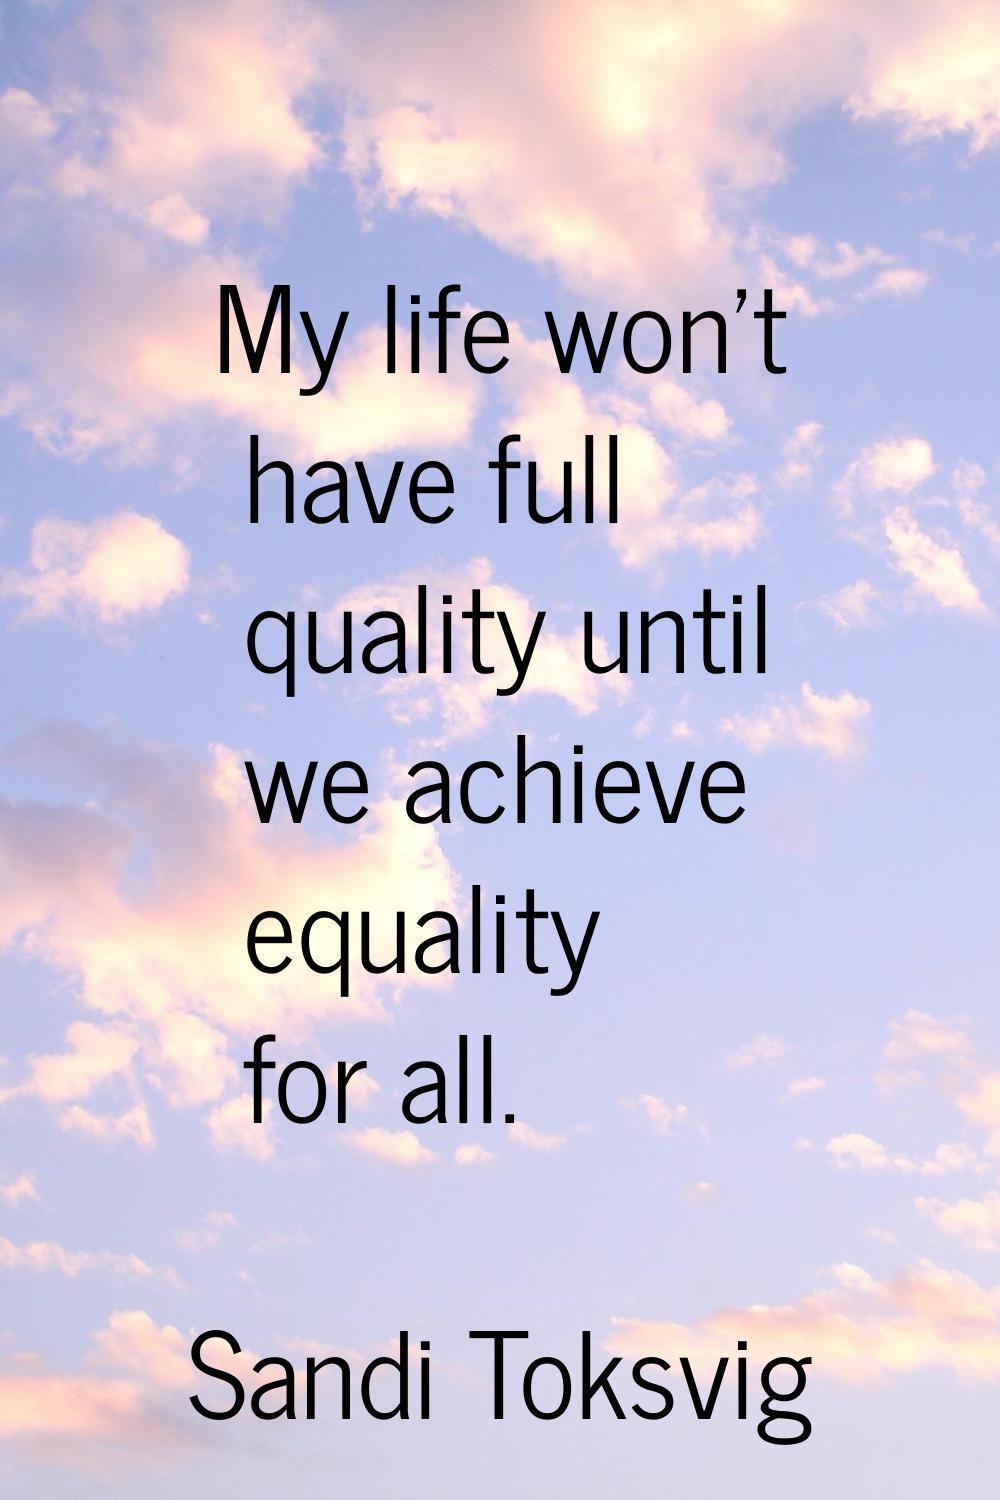 My life won't have full quality until we achieve equality for all.